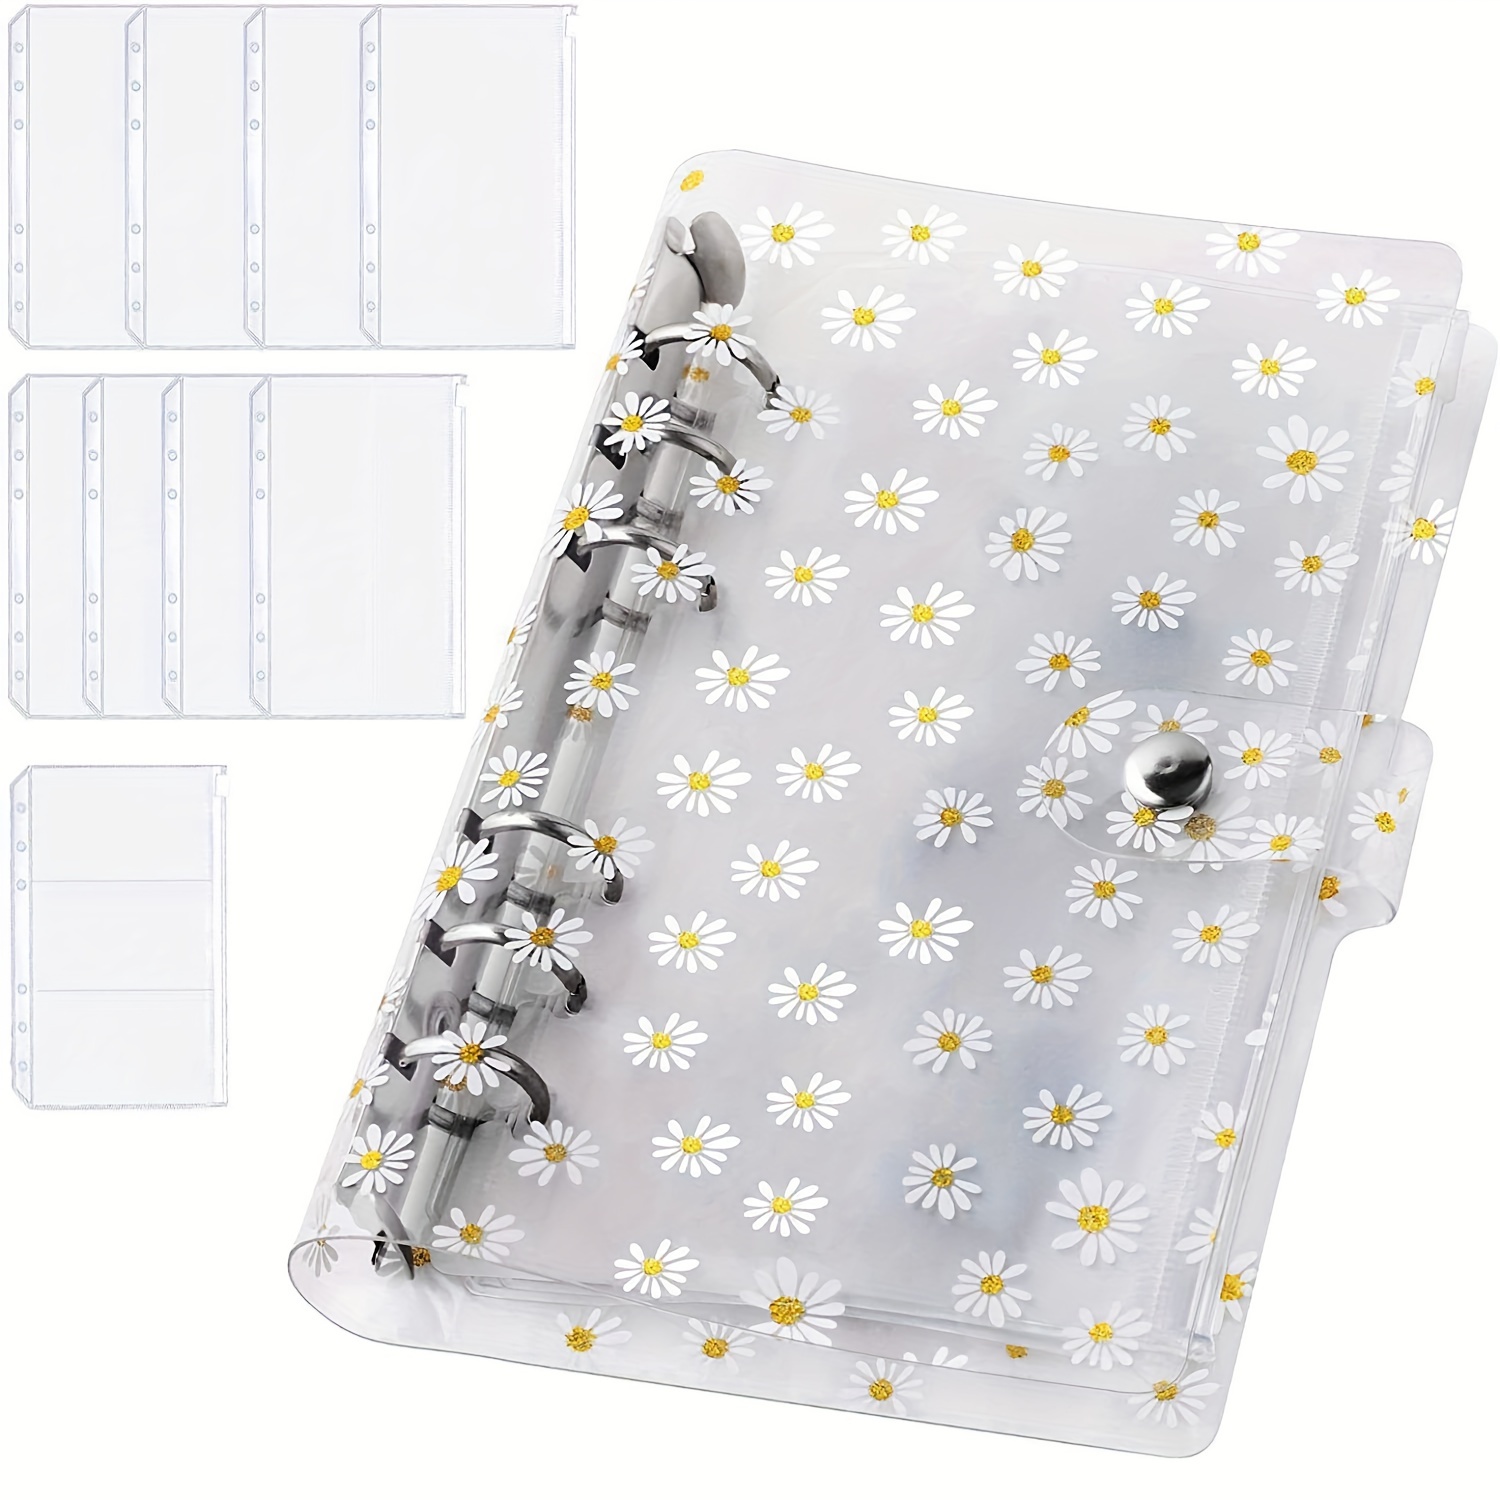 10PCS 6 Ring A5 Binder 3 Pocket Sleeves Transparent Plastic Clear Pockets  Bags Sheets A5 6 Ring Binder Inserts Accessories - AliExpress